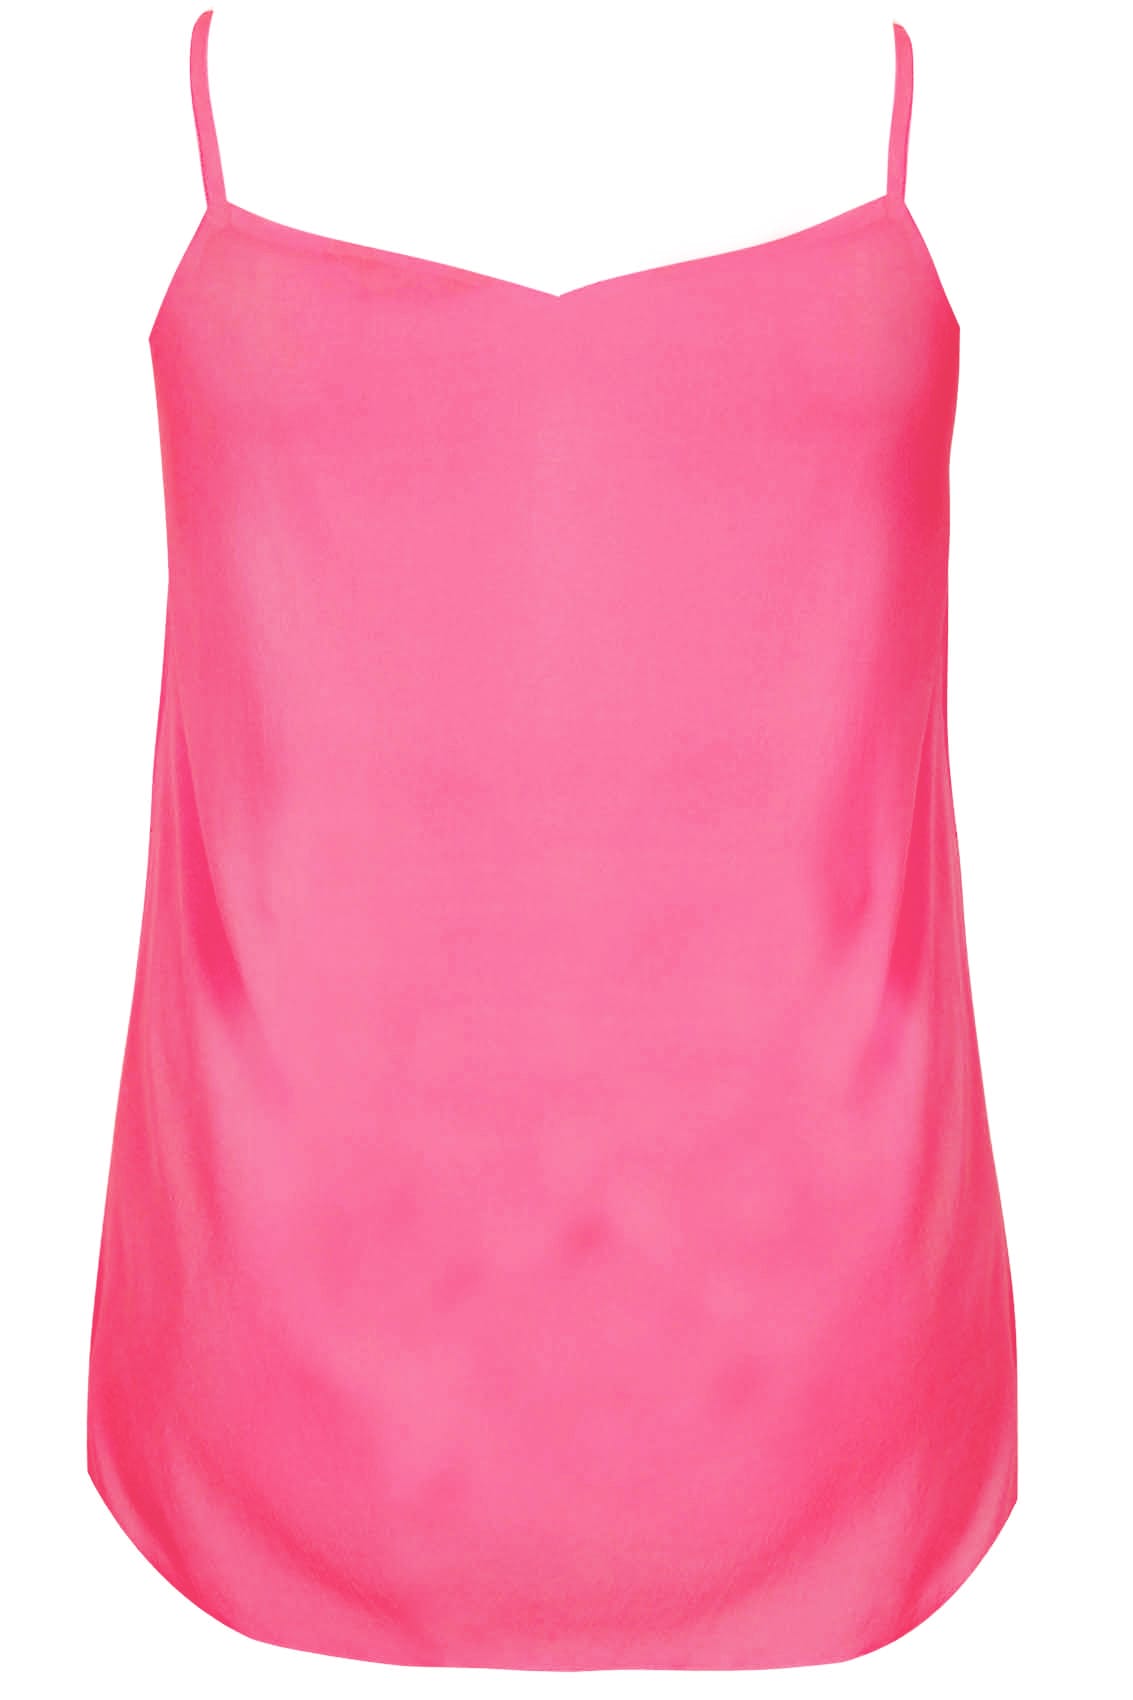 Neon Pink Woven Cami Top, Plus size 16 to 36